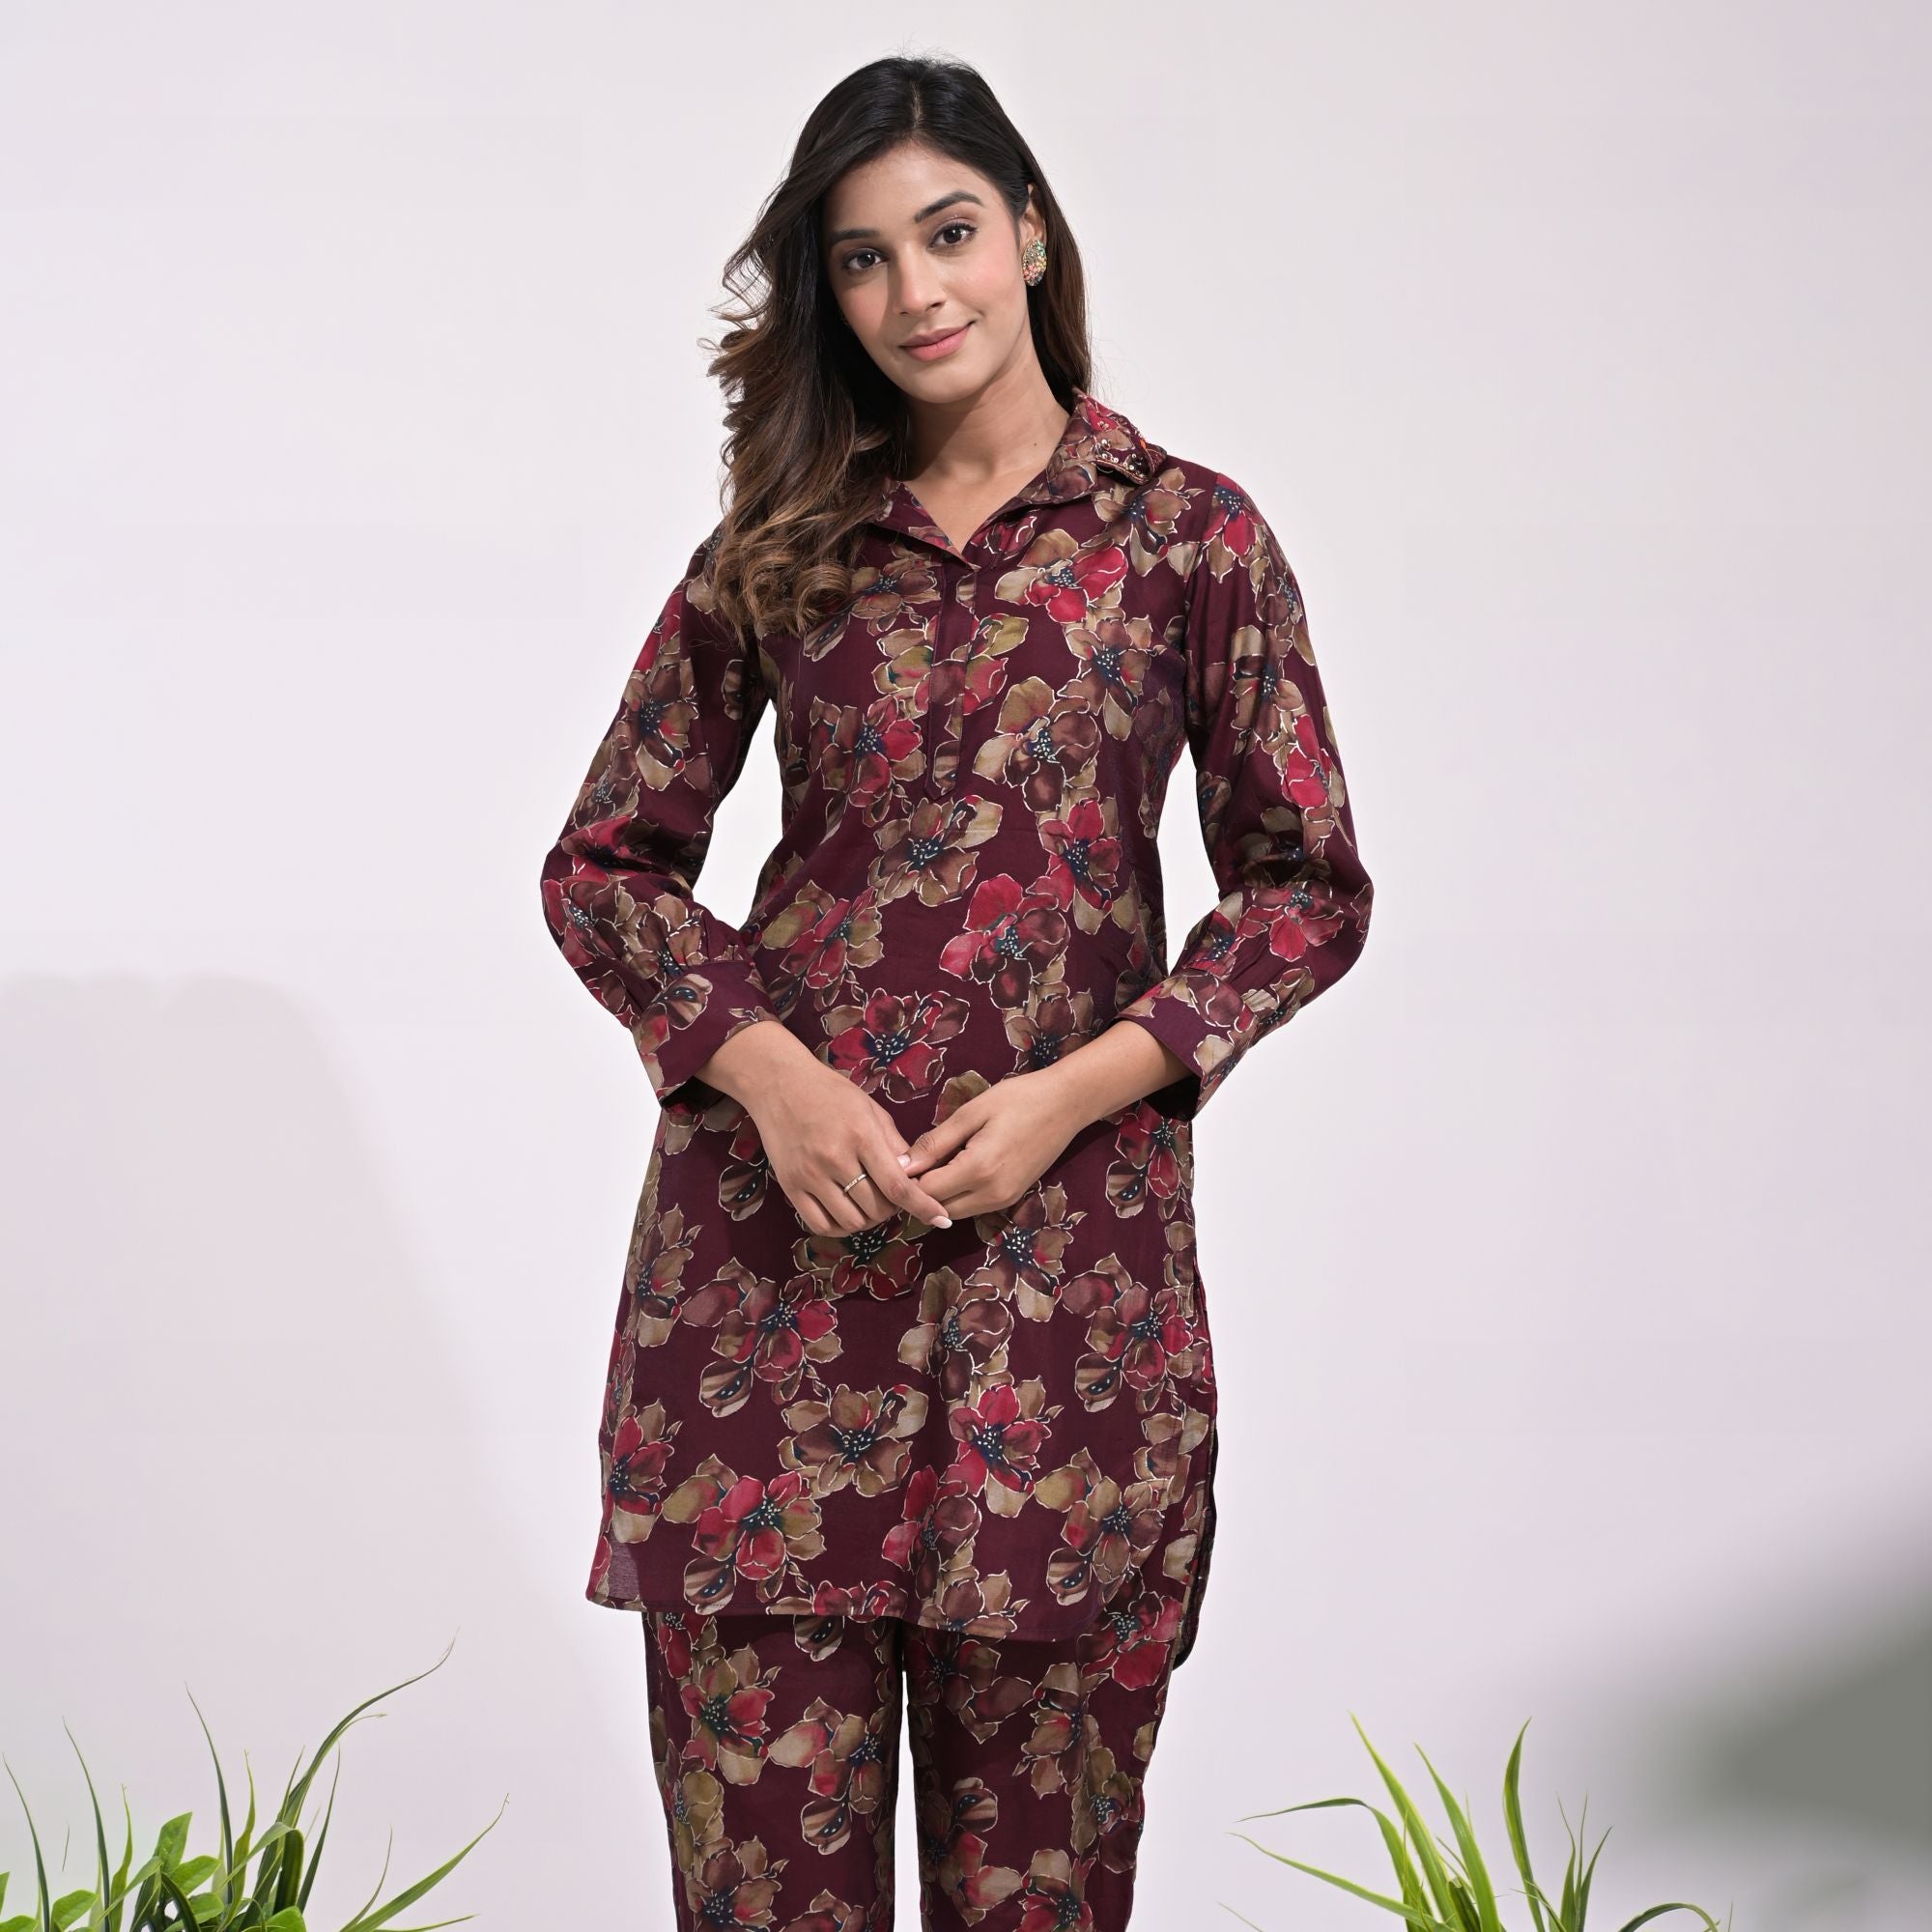 Fancy Cotton Printed Cord Set For Women at Rs.500/Set in jaipur offer by  Lashkarina Fashion